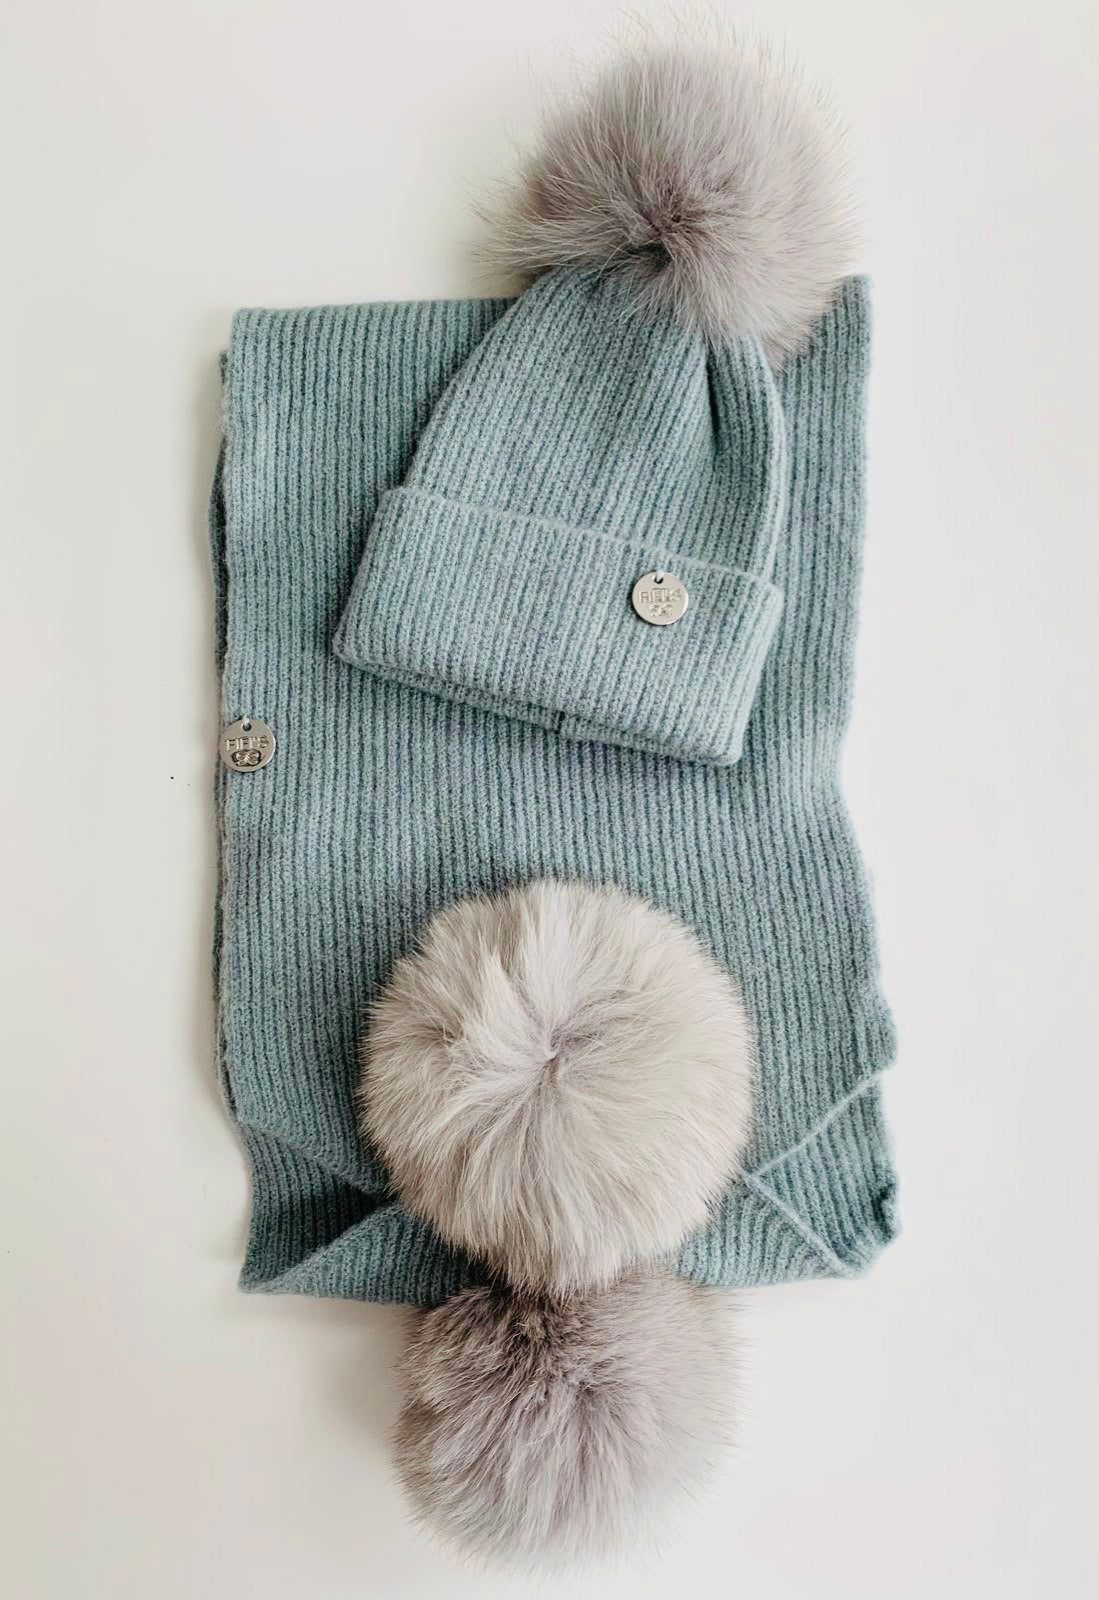 Children’s hat and scarf set - Grey green